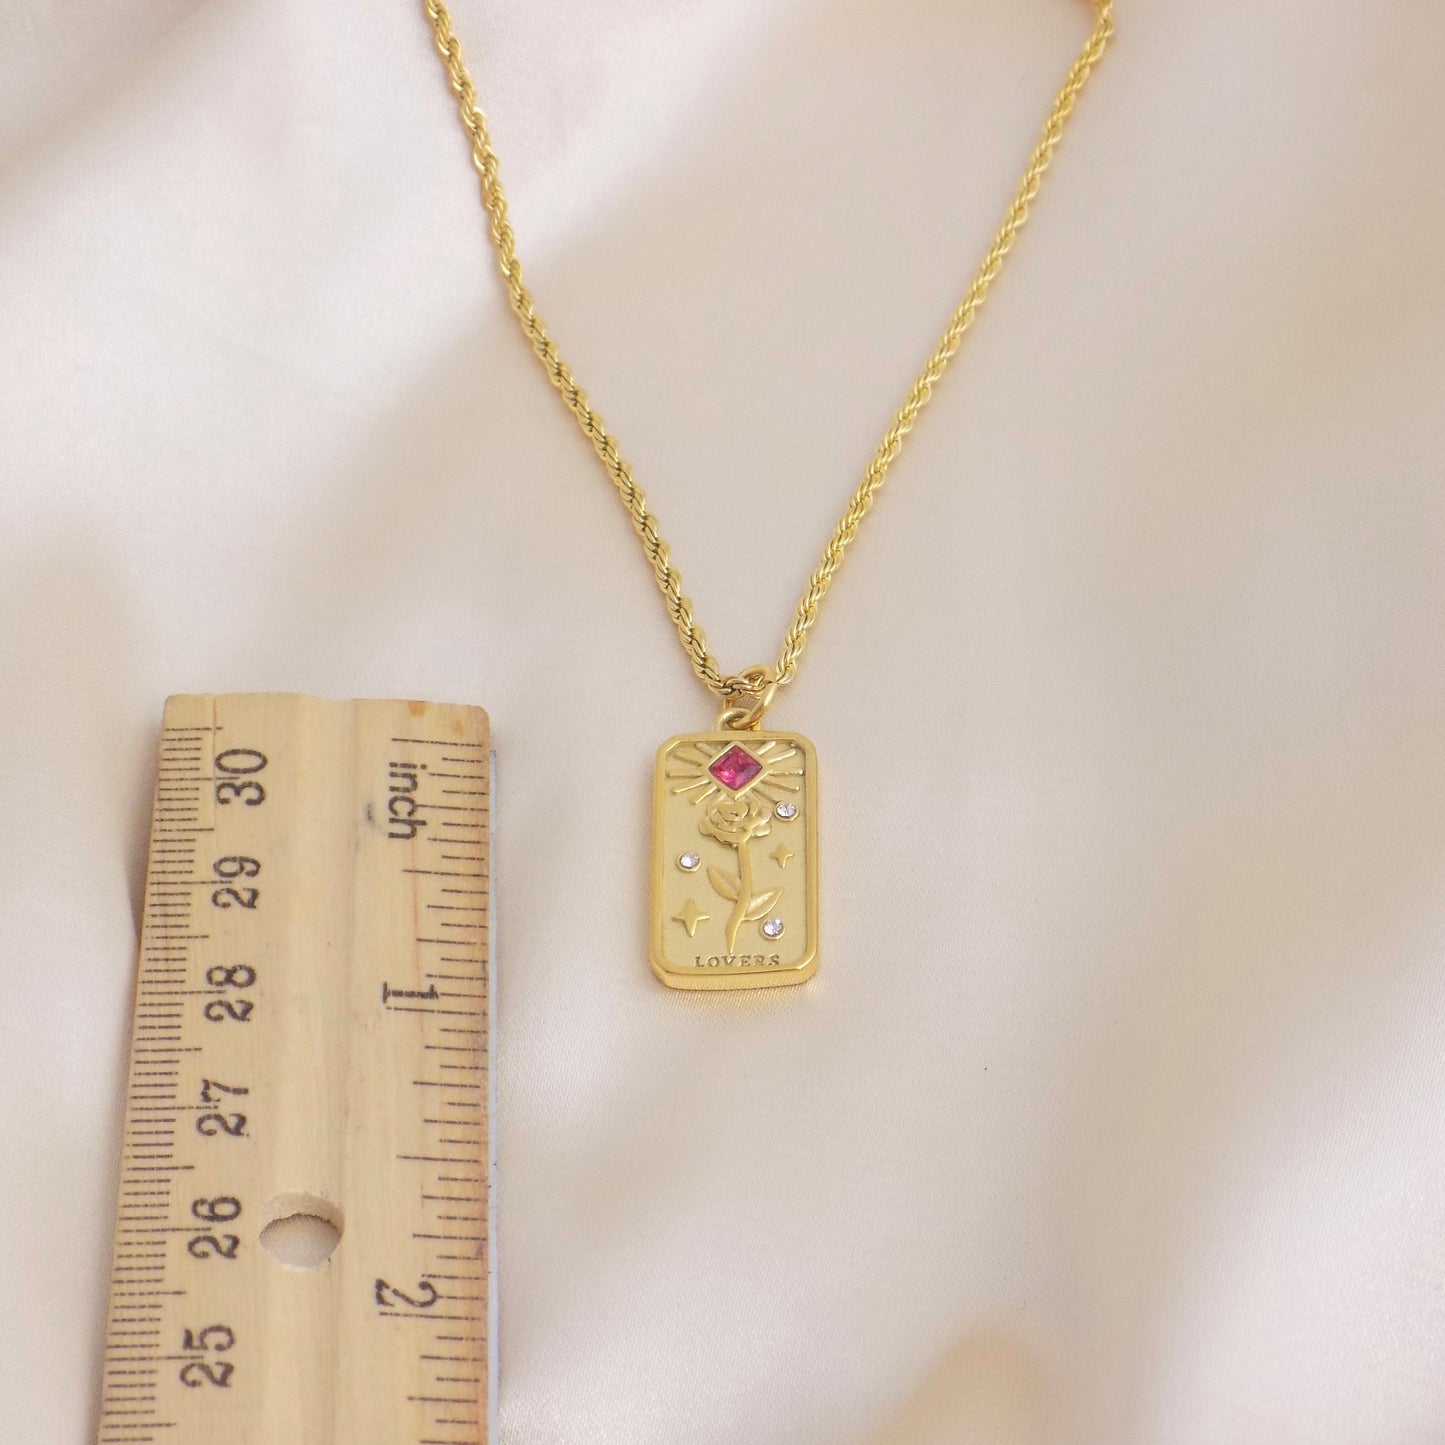 Tarot Card Necklace, Gold Tag Necklace, 18K Gold Stainless Steel Rope Chain, Ruby Flower Charm, Trendy Layering, M6-105